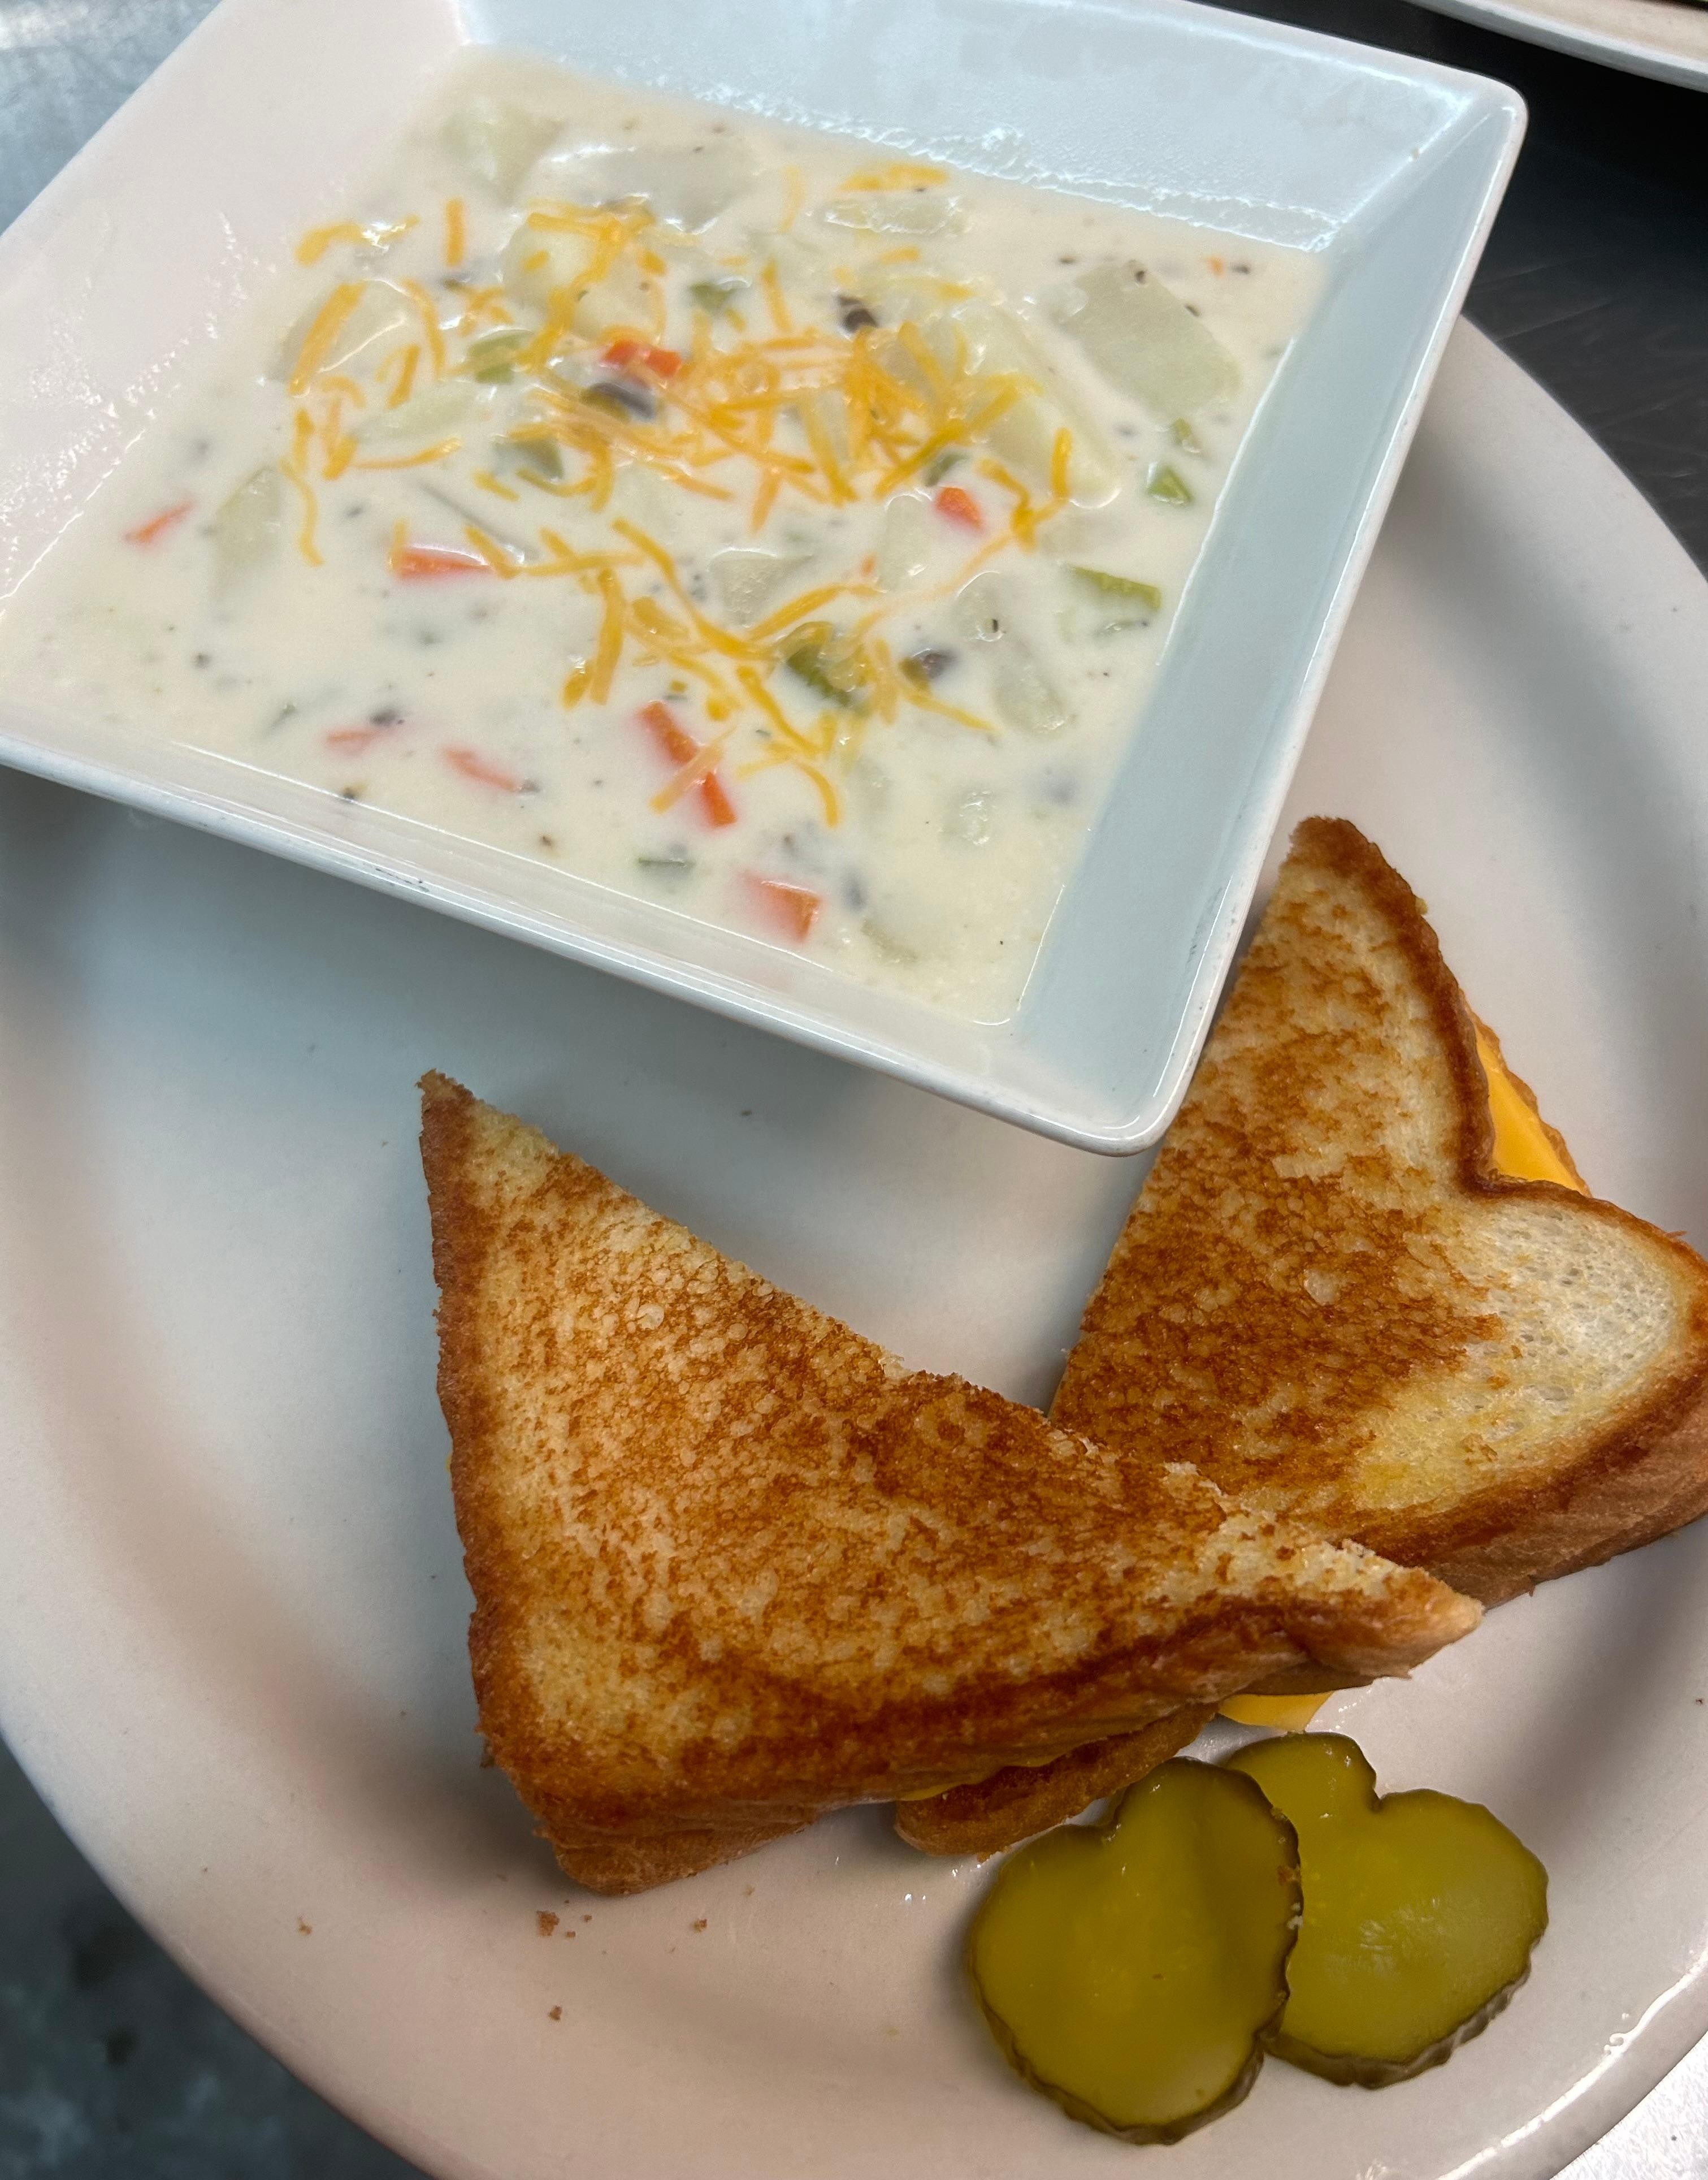 24 oz Loaded potato soup with grilled cheese